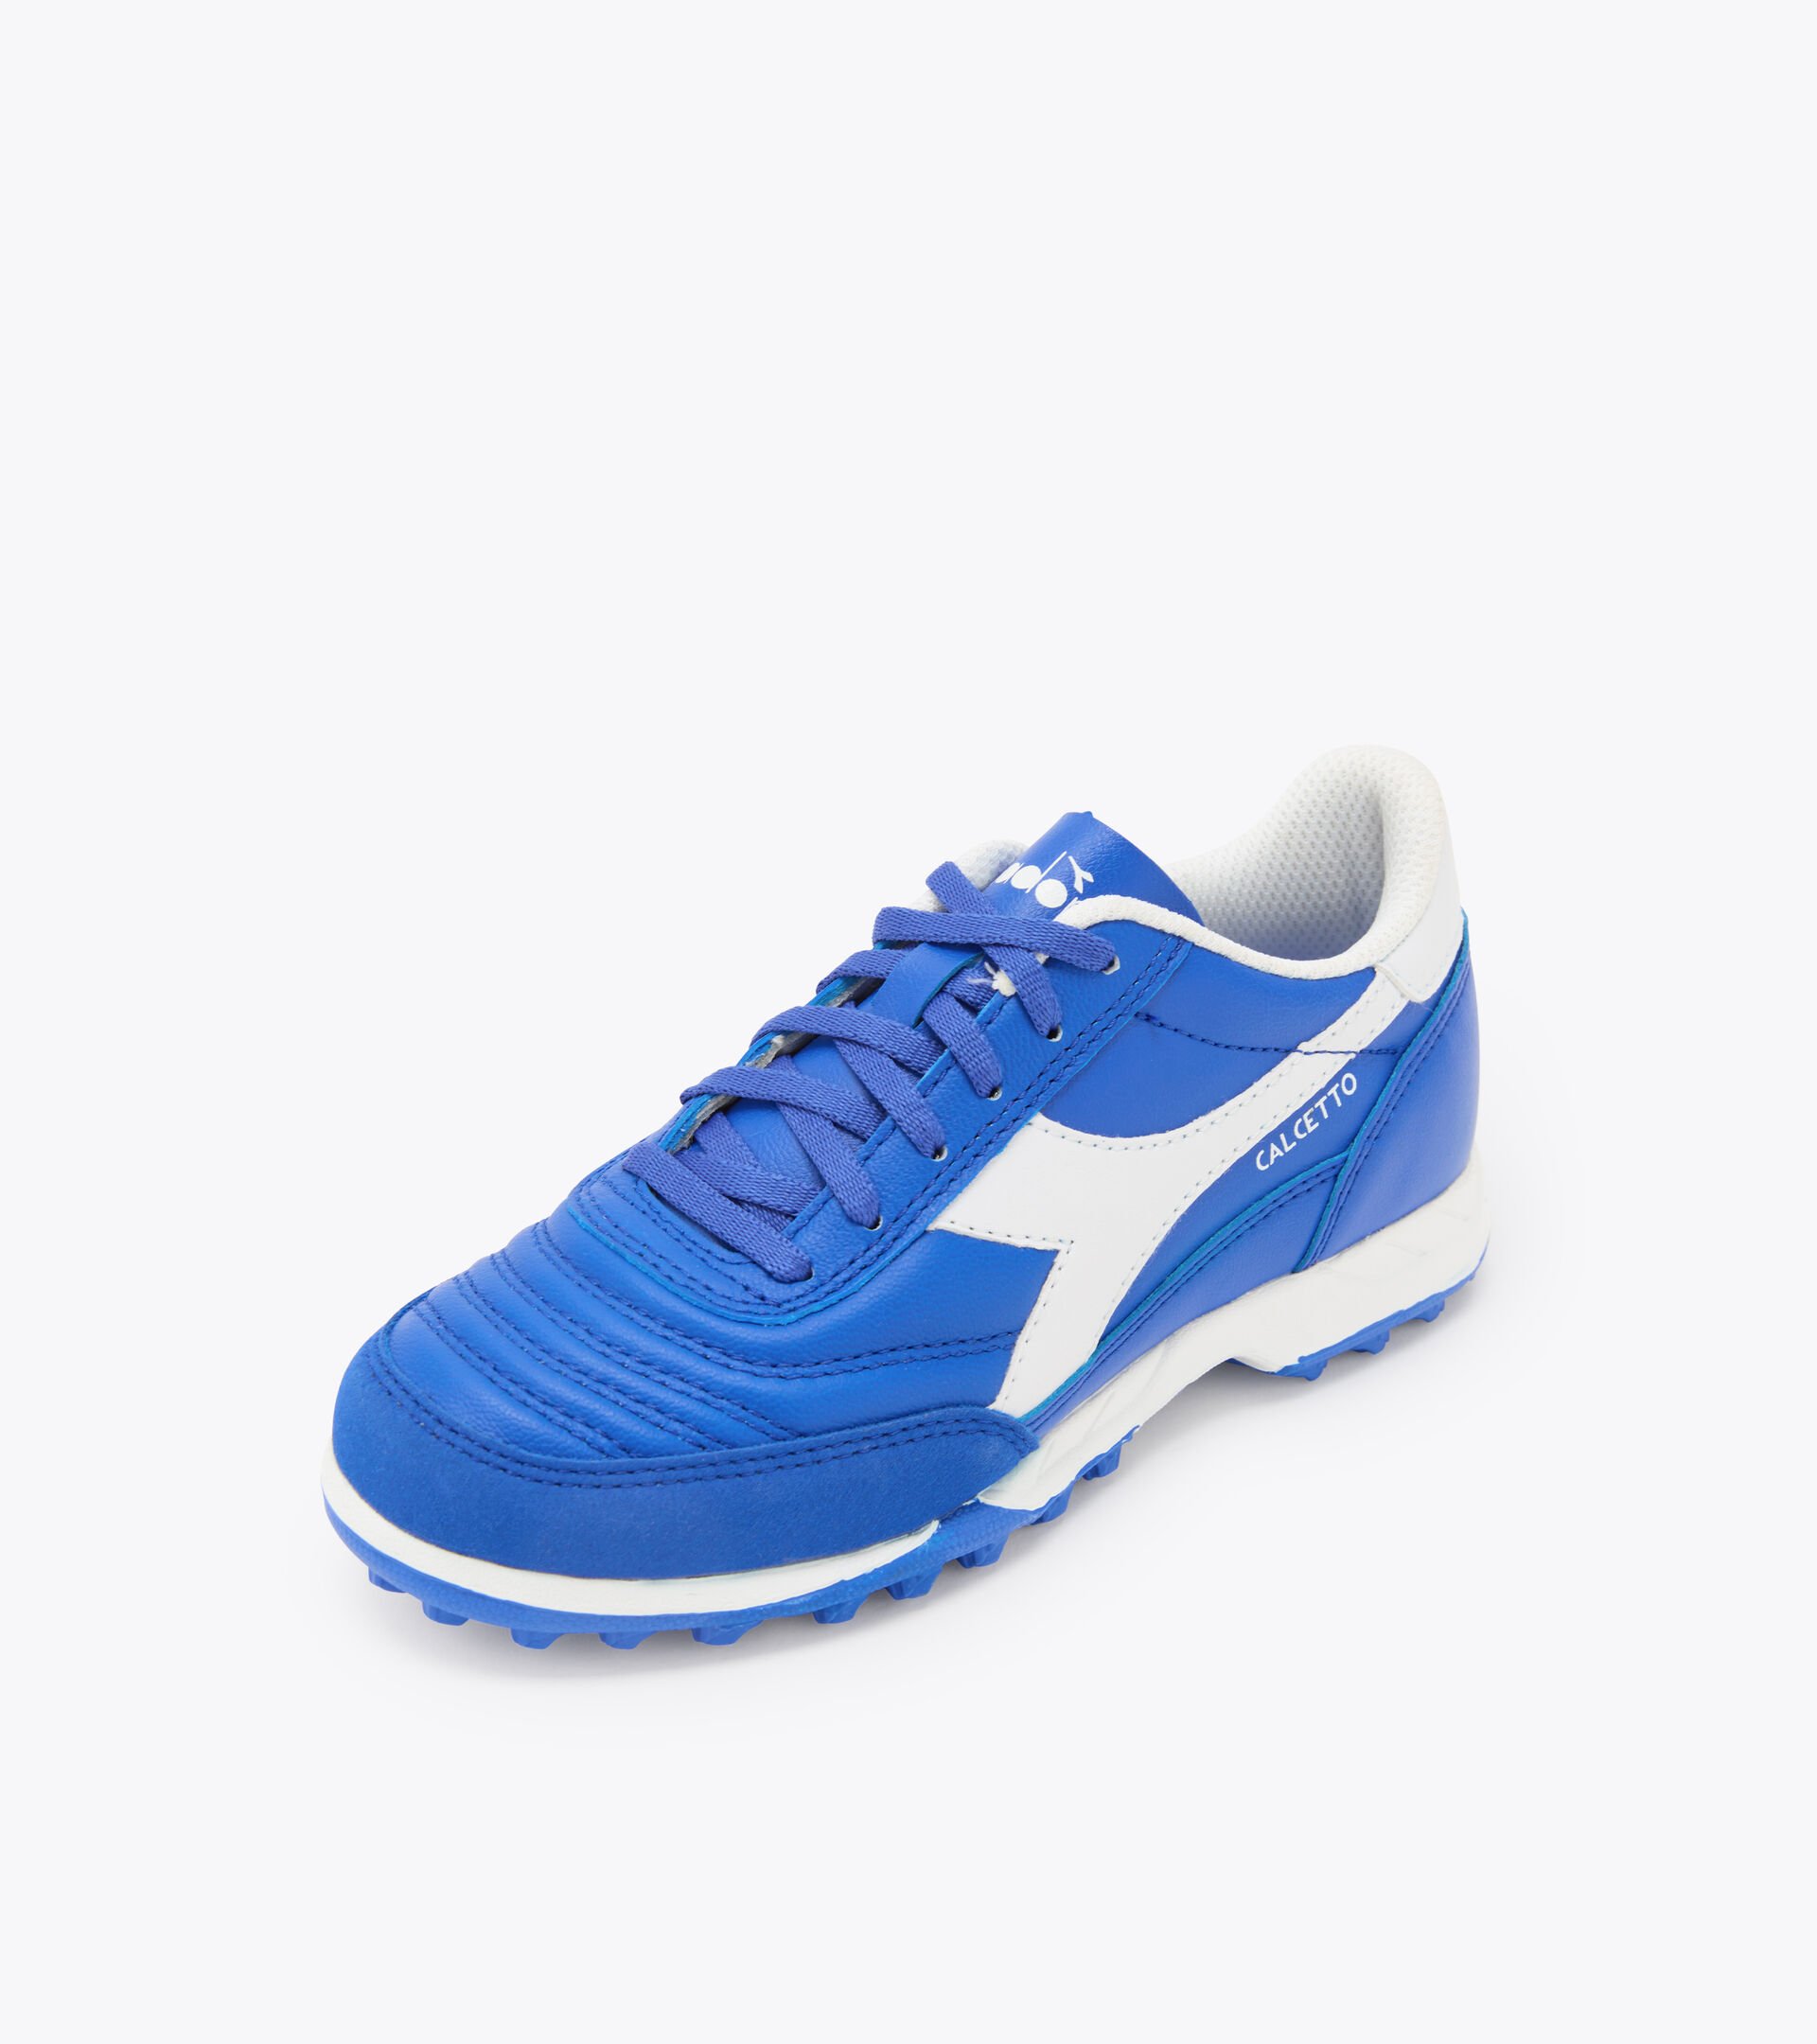 Futsal boot - Specific outsole for synthetic/hard grounds CALCETTO II LT TF Y ROYAL BLUE/OPTICAL WHITE - Diadora